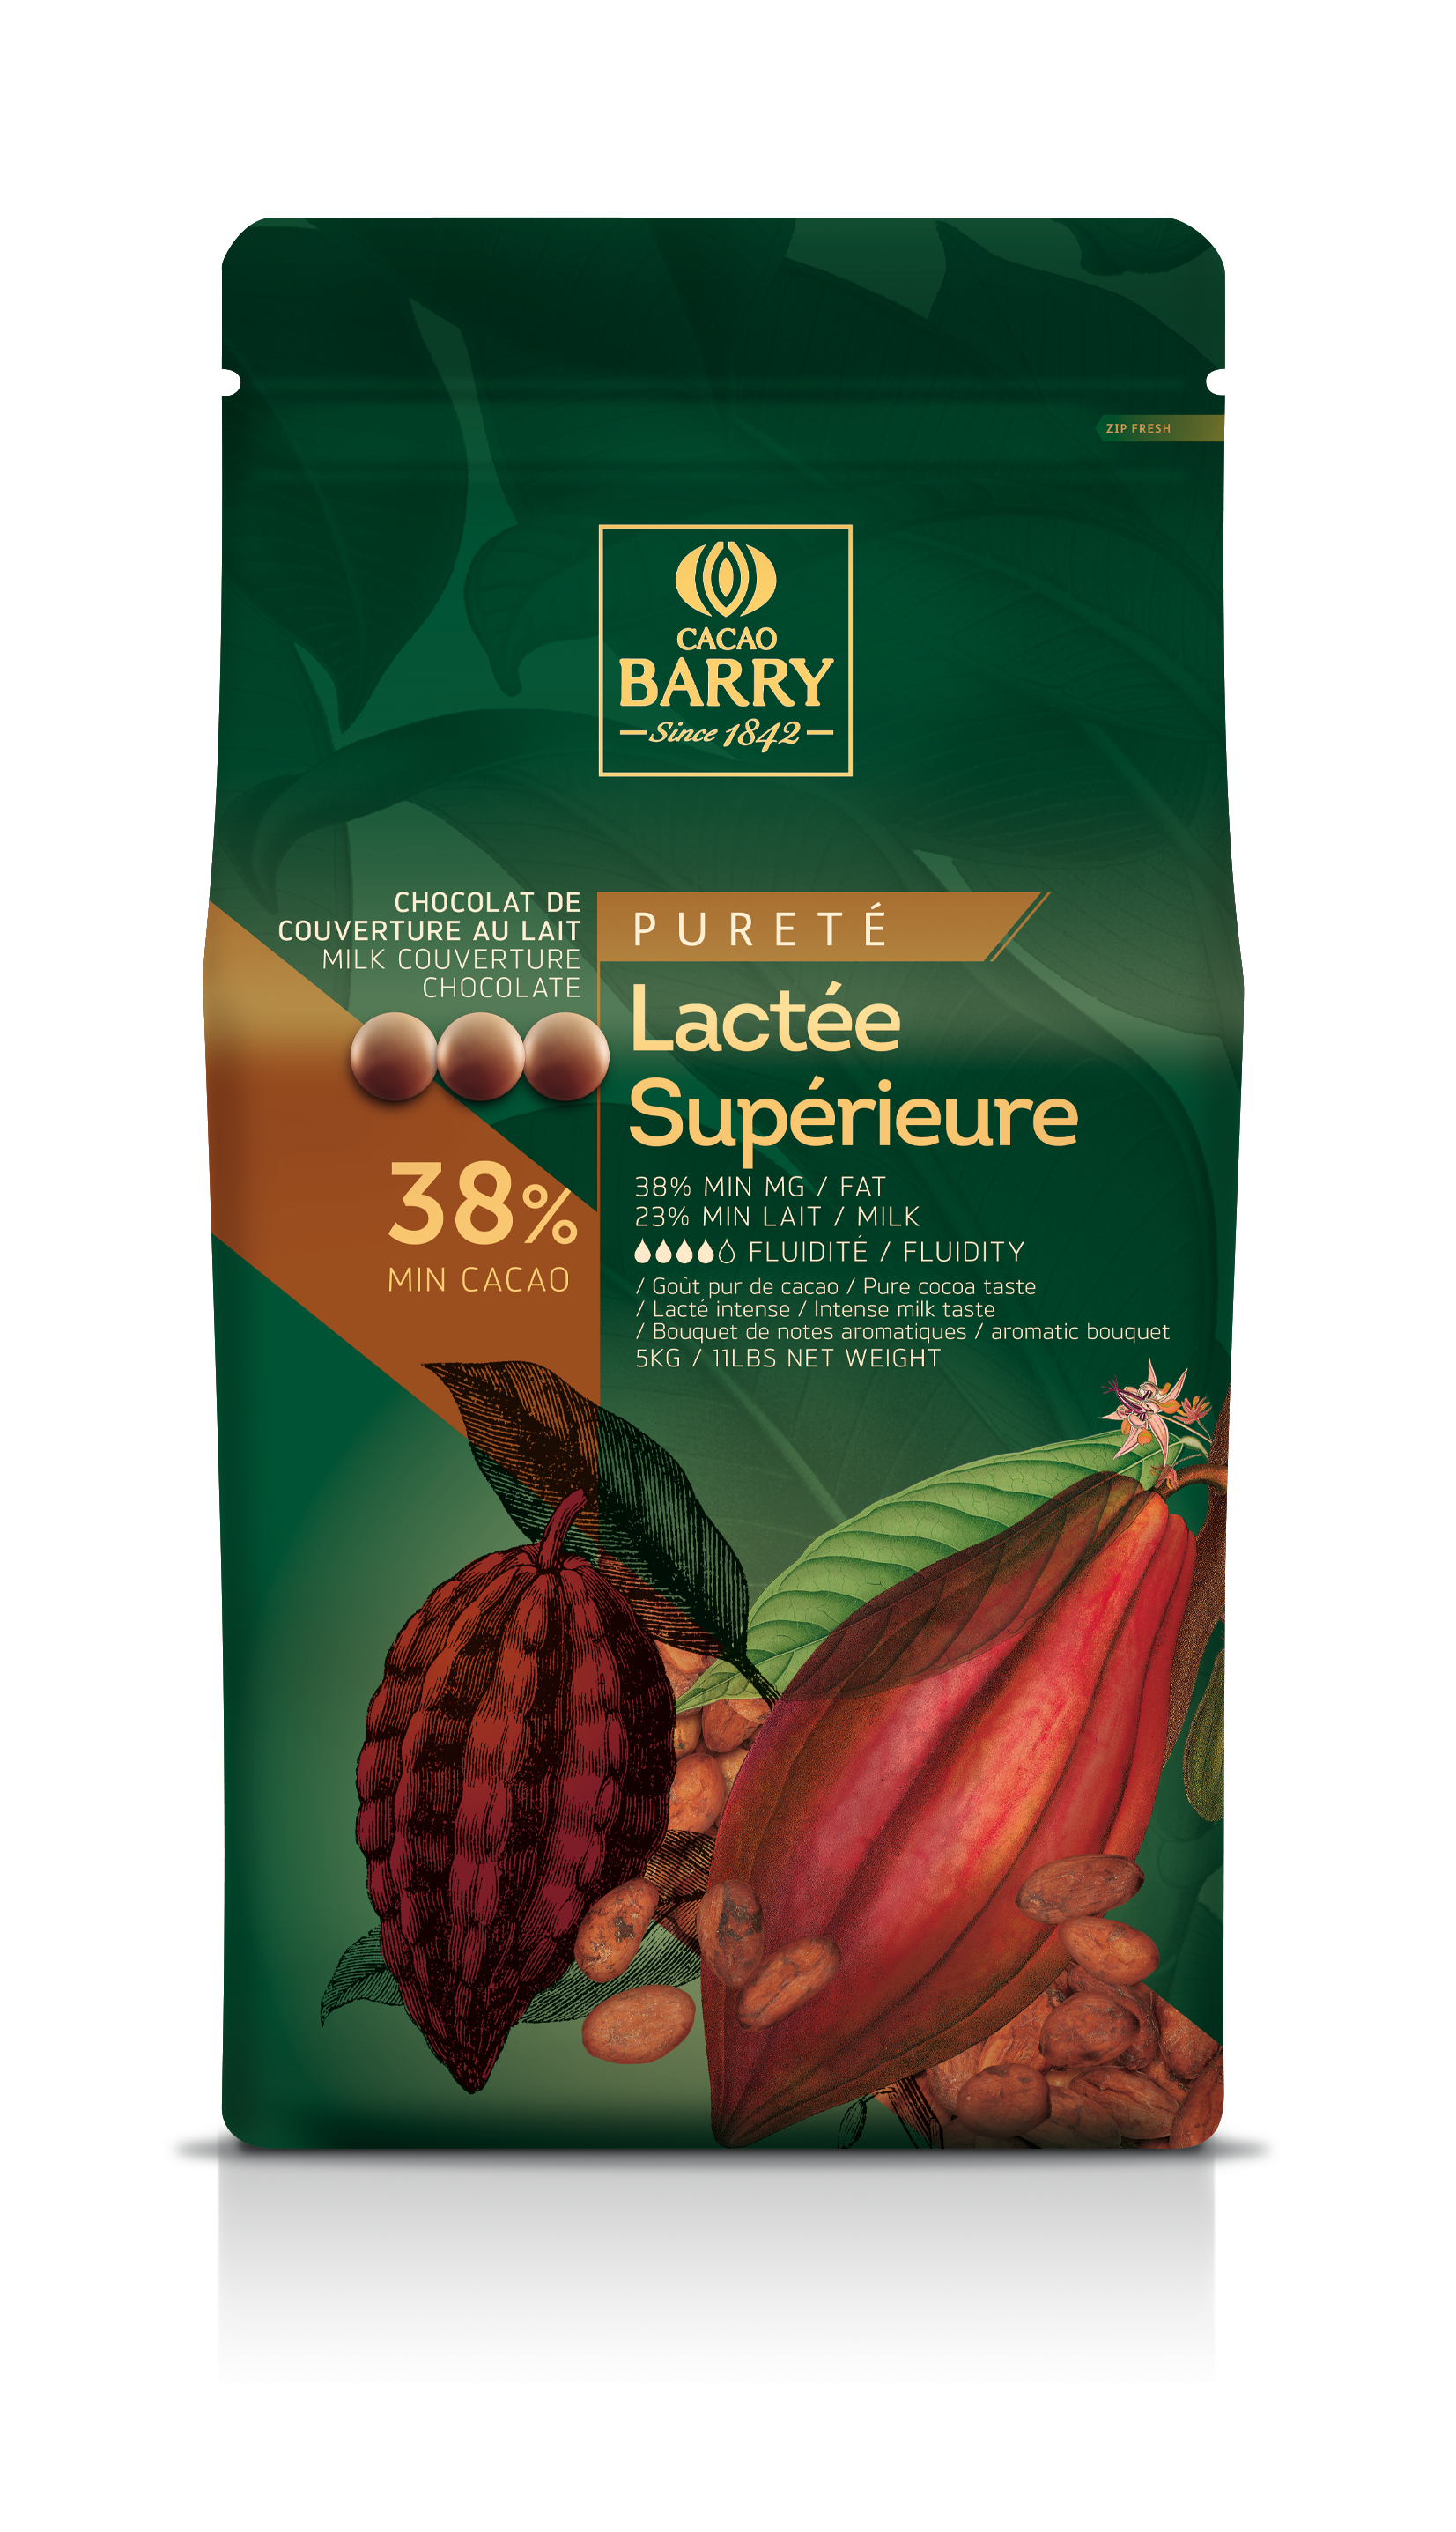 Cacao Barry 38% Lactee Superieure 5kg